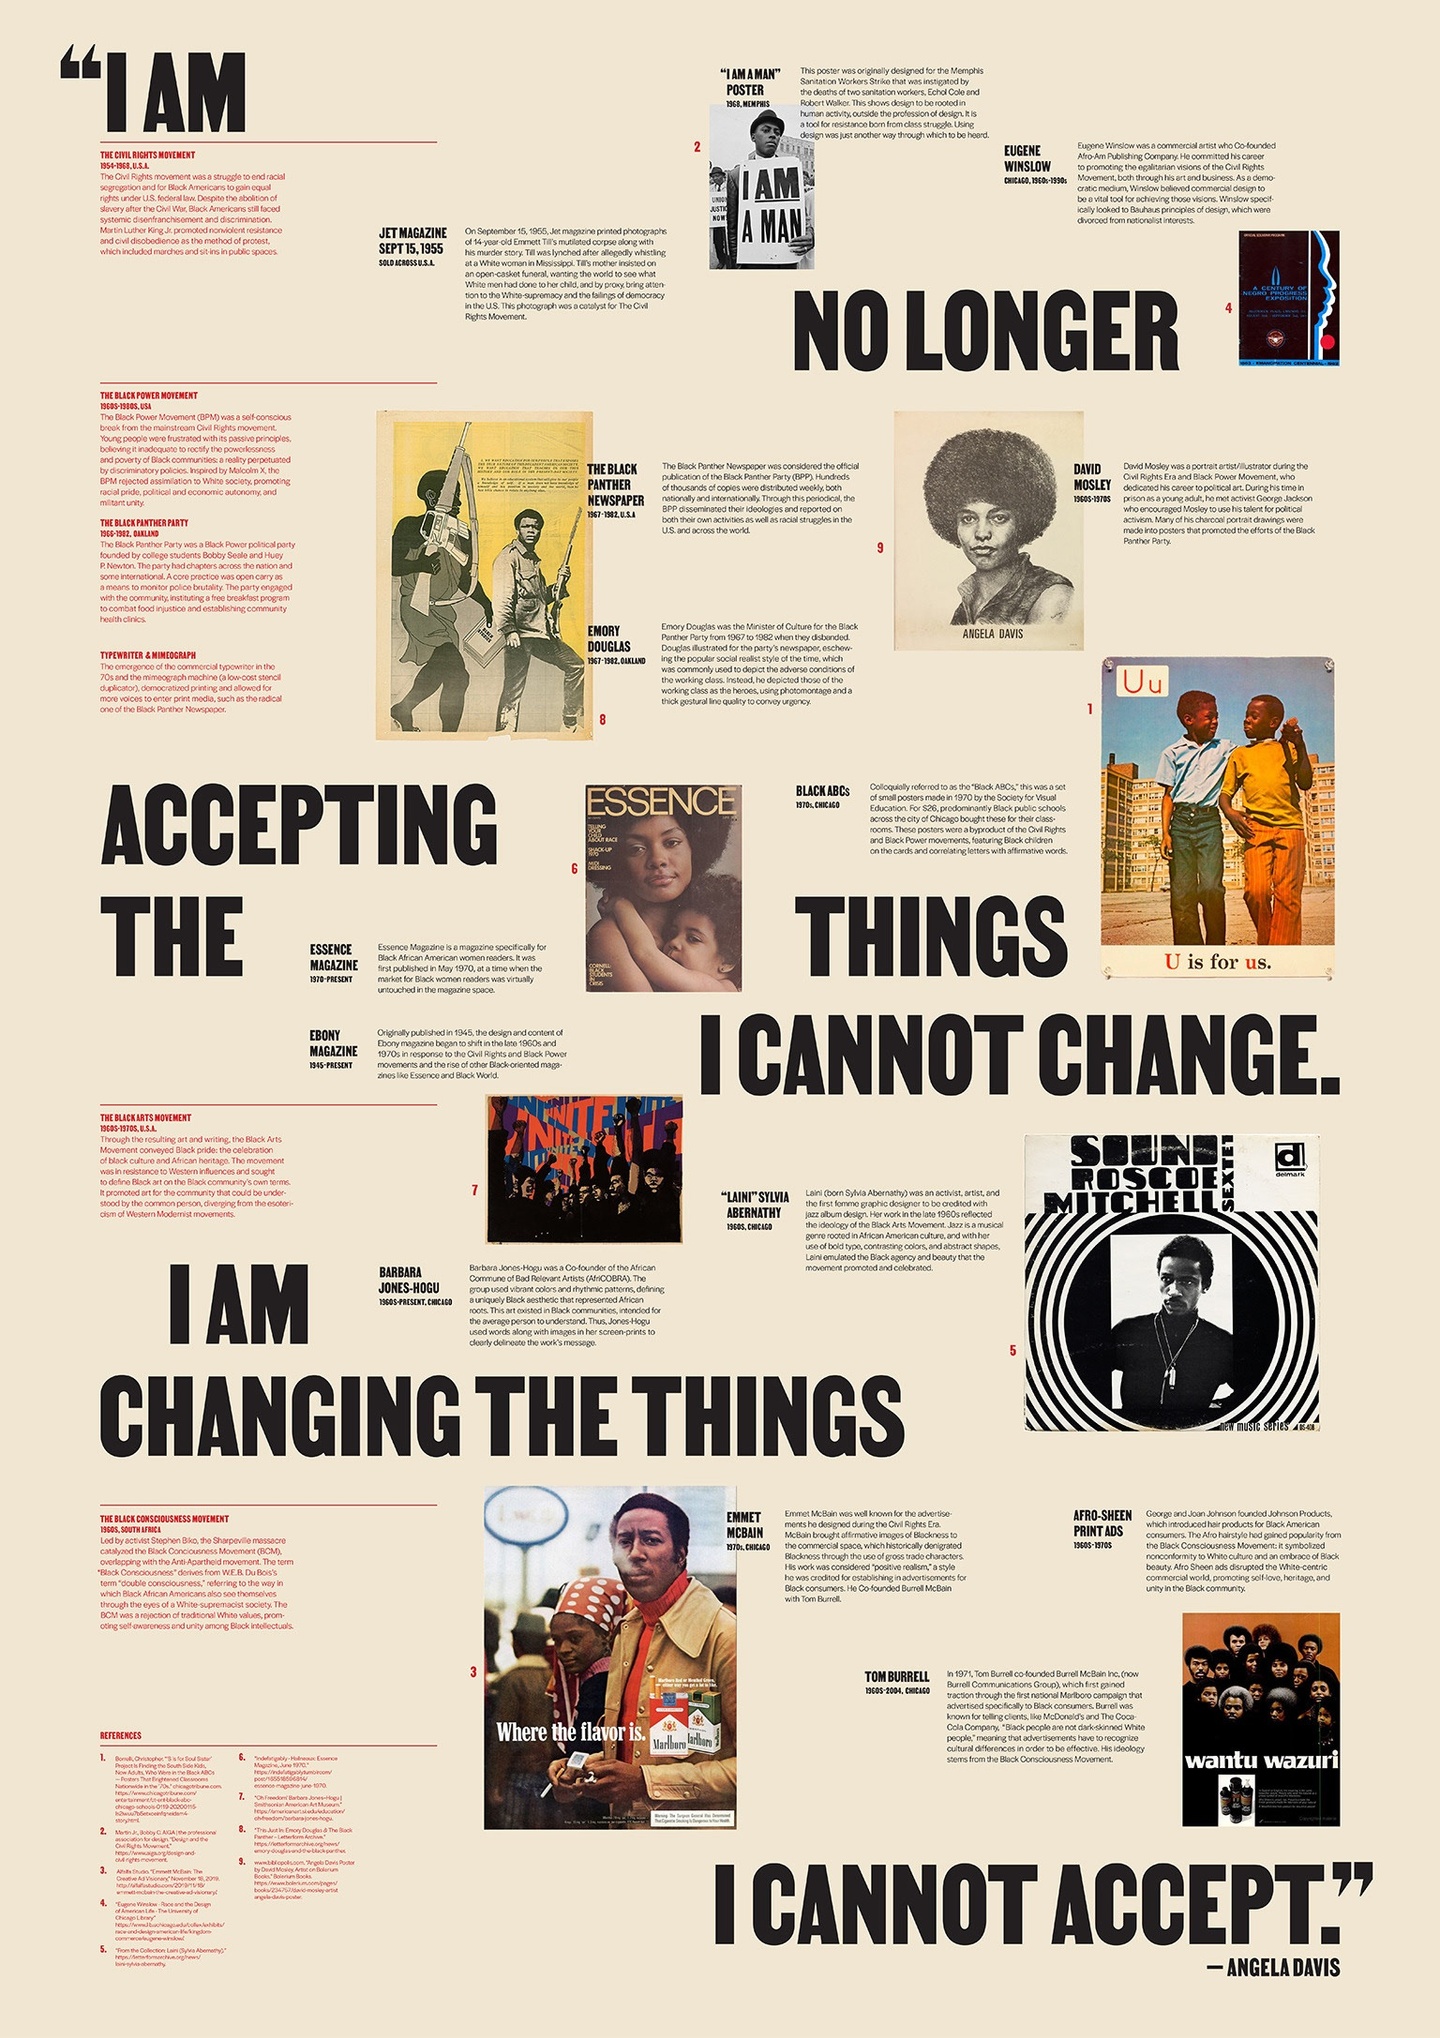 Poster with various images and text blocks with an Angela Davis quote dispersed throughout reading, "I AM NO LONGER ACCEPTING THE THINGS I CANNOT CHANGE. I AM CHANGING THE THINGS I CANNOT ACCEPT."